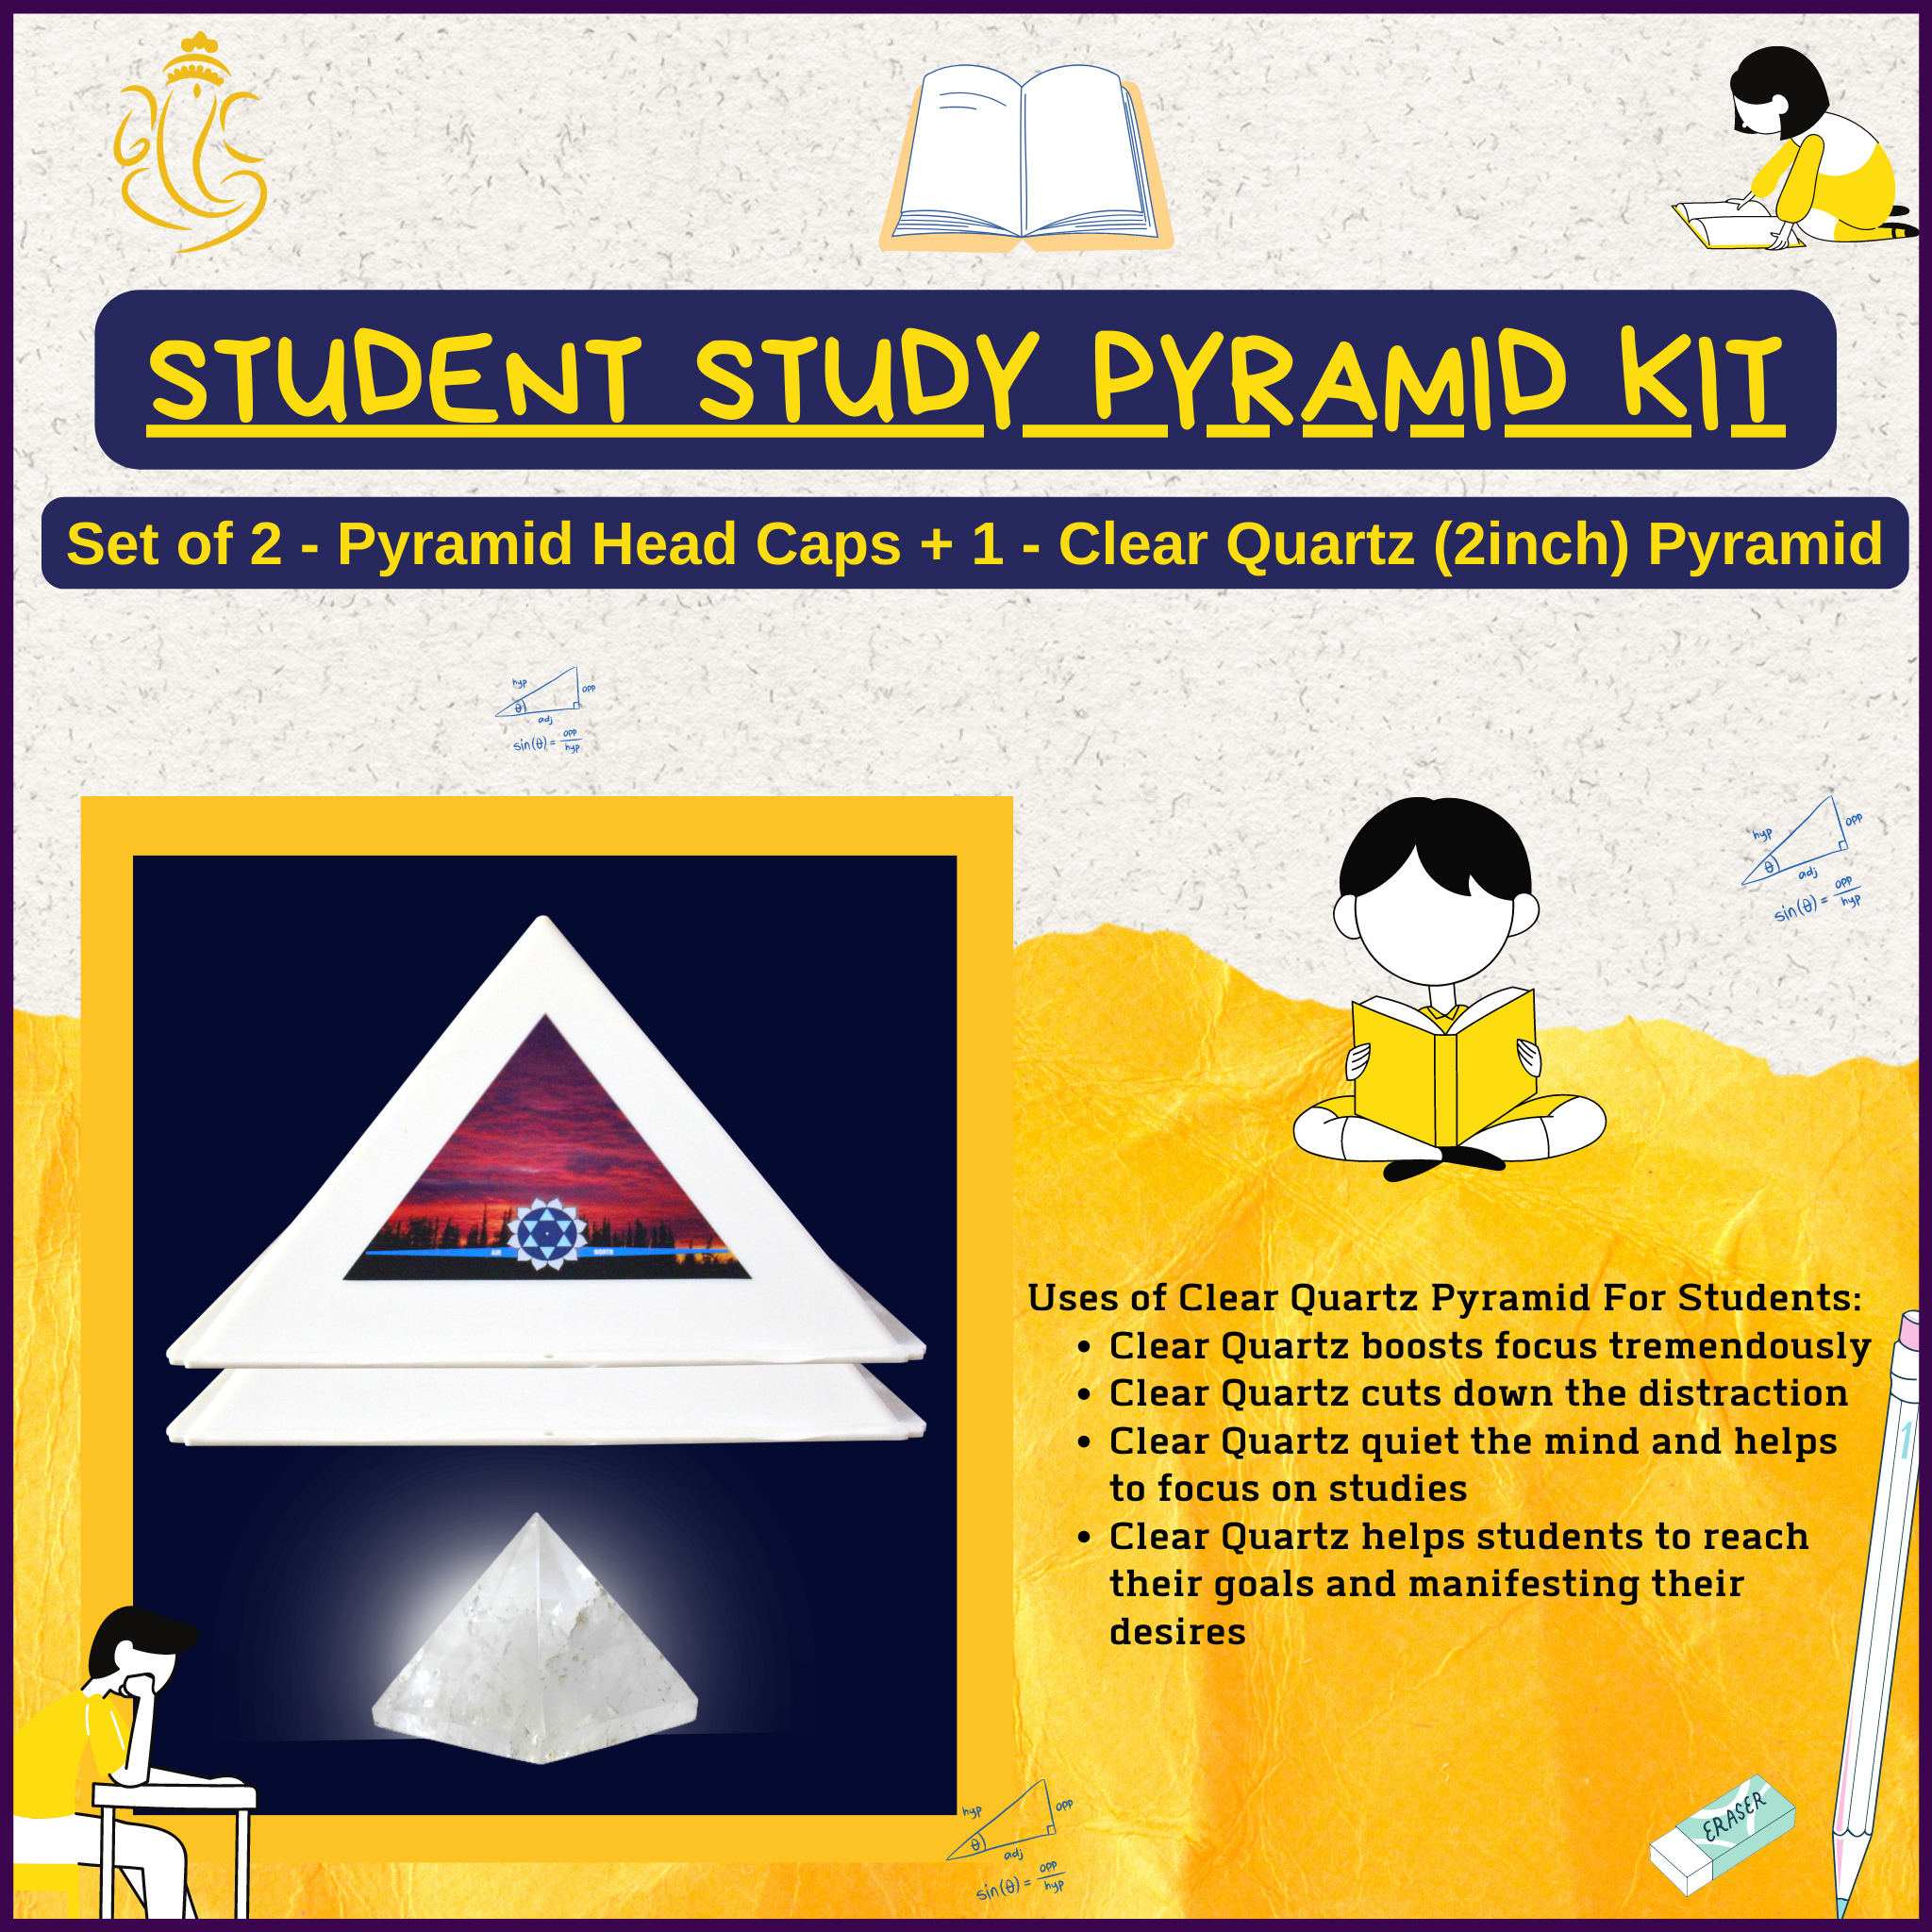 Student Study Pyramid Kit - Set of 2 - Plastic Pyramid Head Caps + 1 - Clear Quartz Pyramid Stone(2inch) for Students For Scoring Good Marks In Exams - Genuine and Certified-1